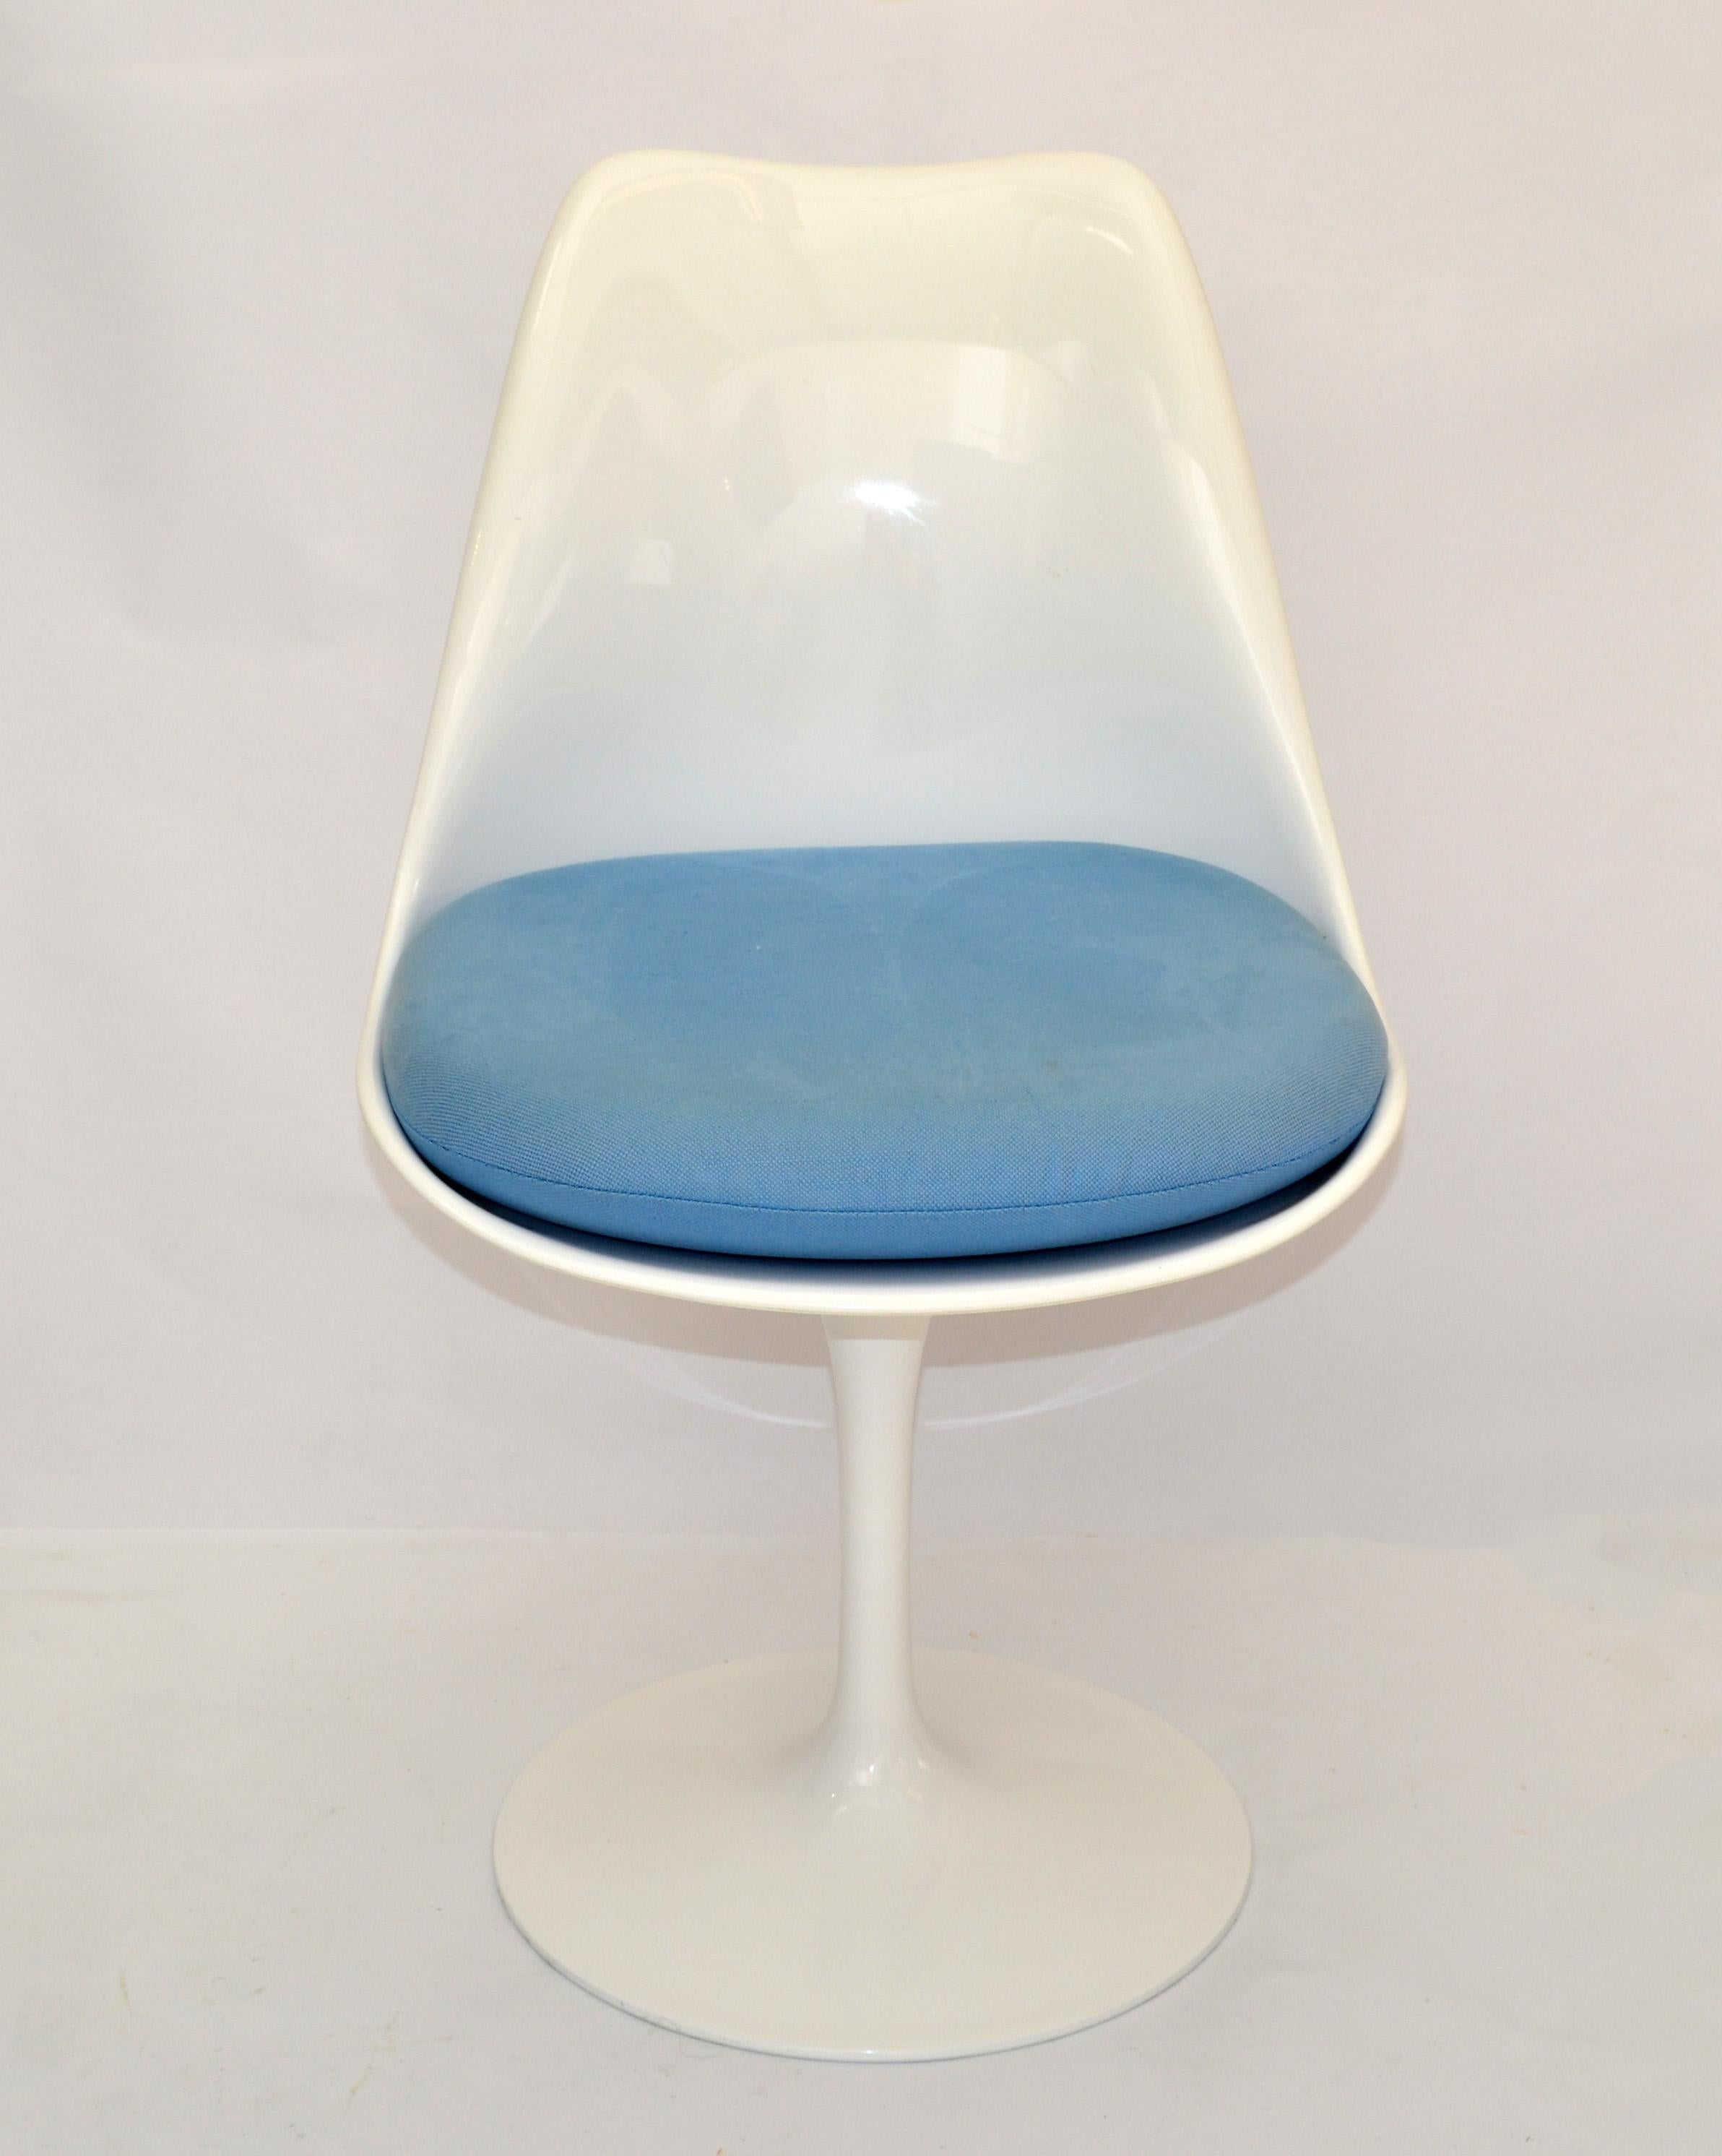 Modern white tulip swivel side, vanity or office chair attributed to Eero Saarinen and made in the Style of Knoll.
Comes with a thick light blue Seat Cushion and the swivel function works smoothly.
Iron cast base in white enamel with molded